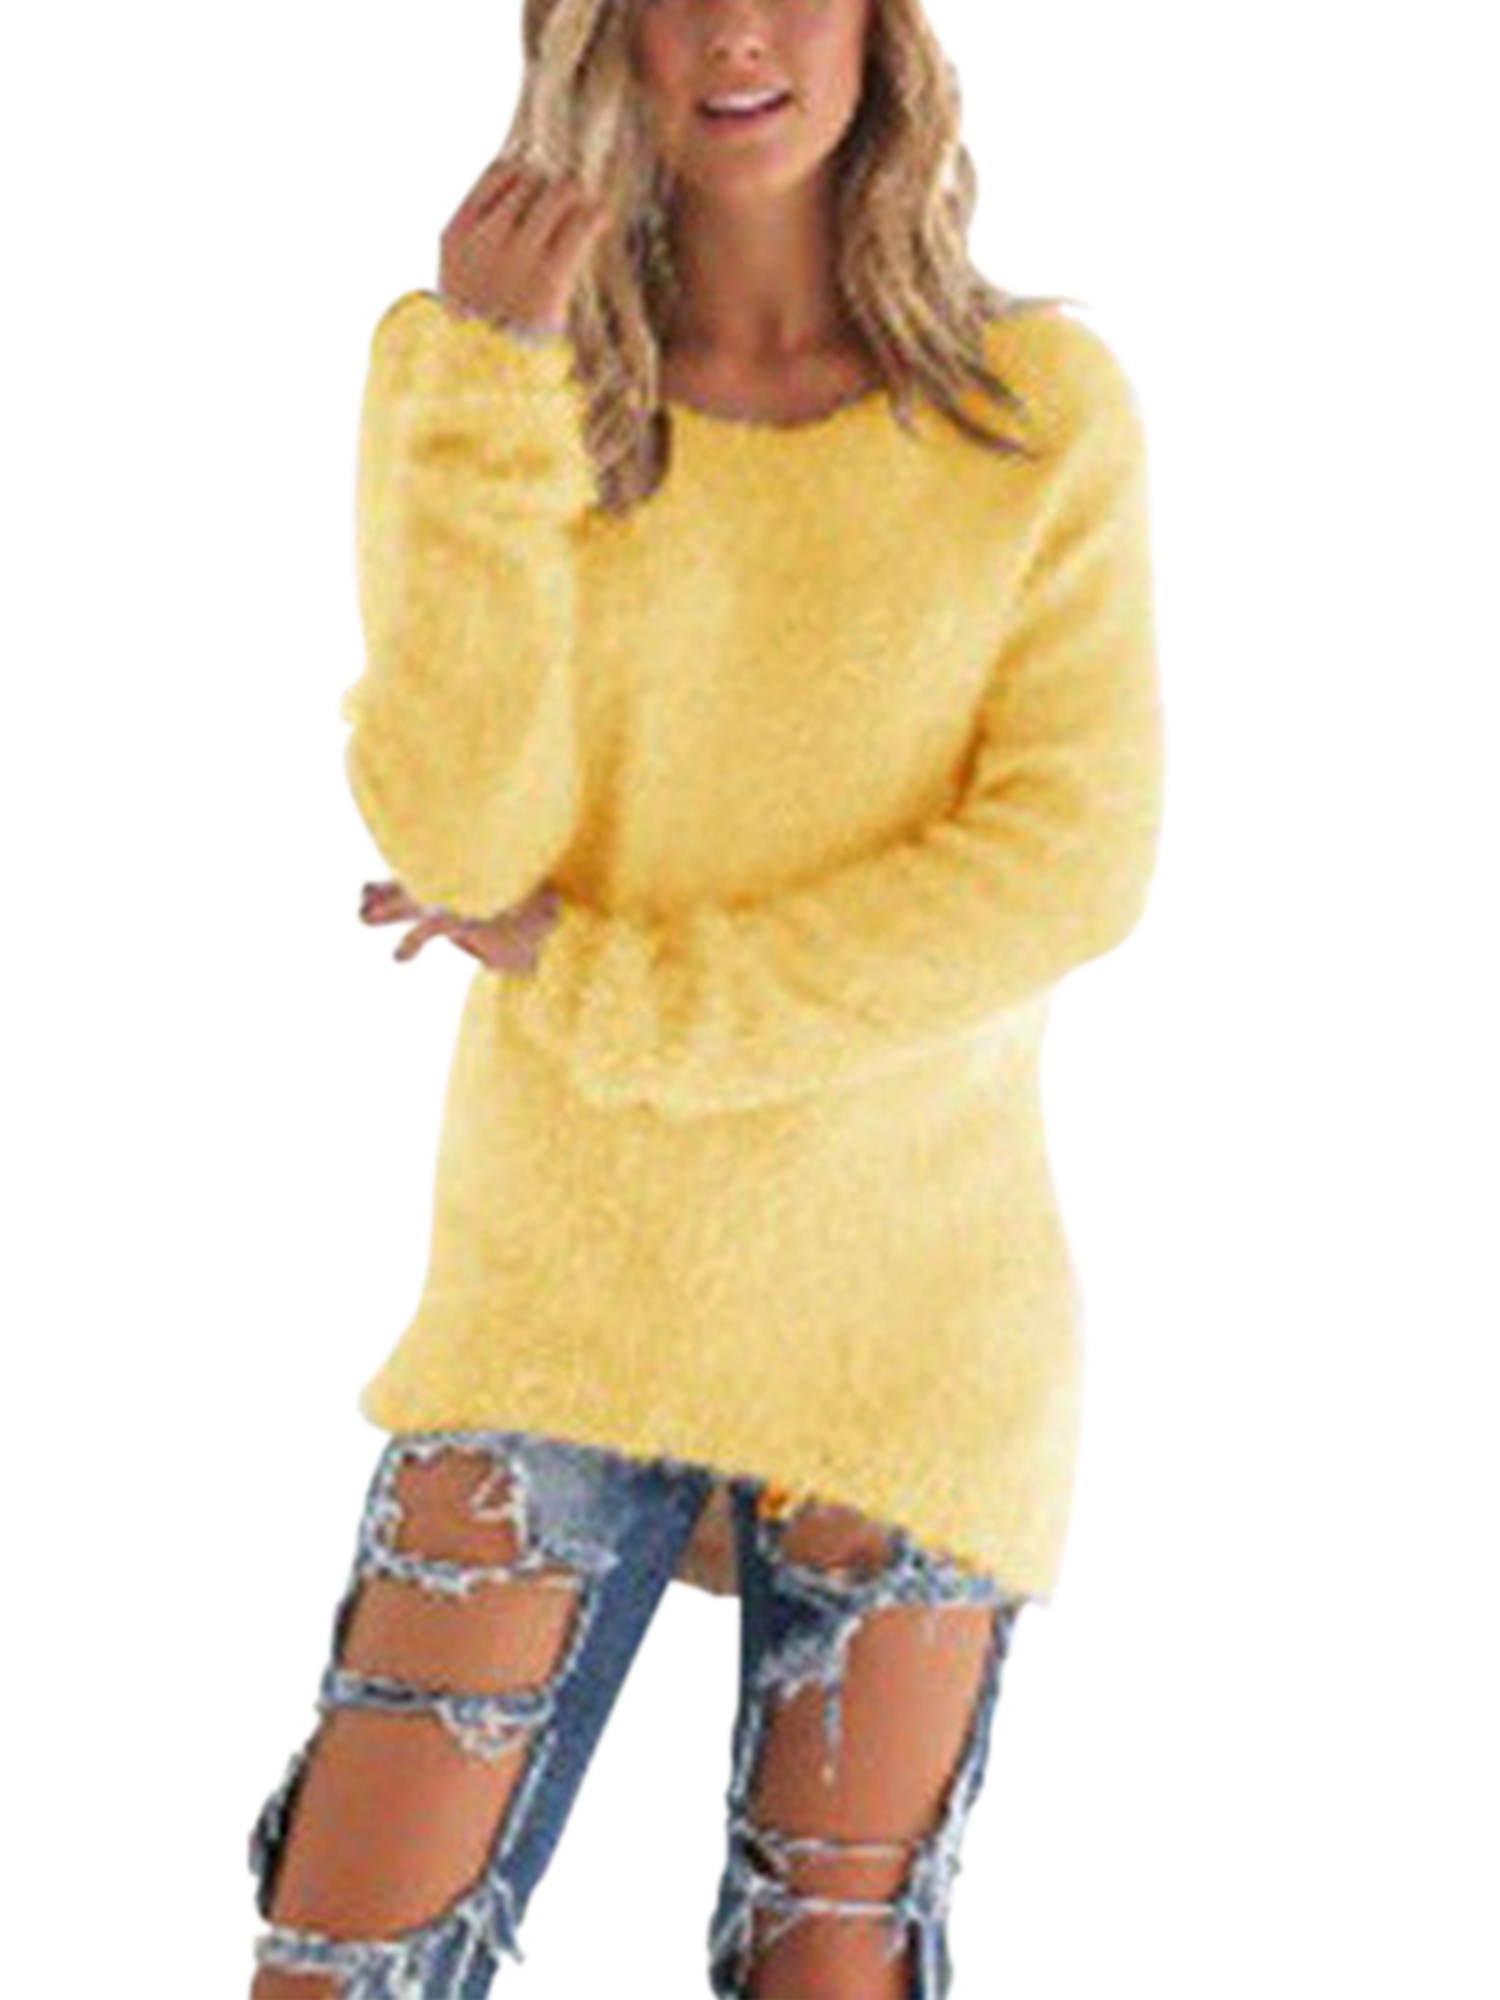 Plus Size Women Mid-Length Loose Solid Color Pullover Sweaters High Low Fluffy Tunics Crew Neck Womens Knit Tops for Junior Ladies Women - image 1 of 2